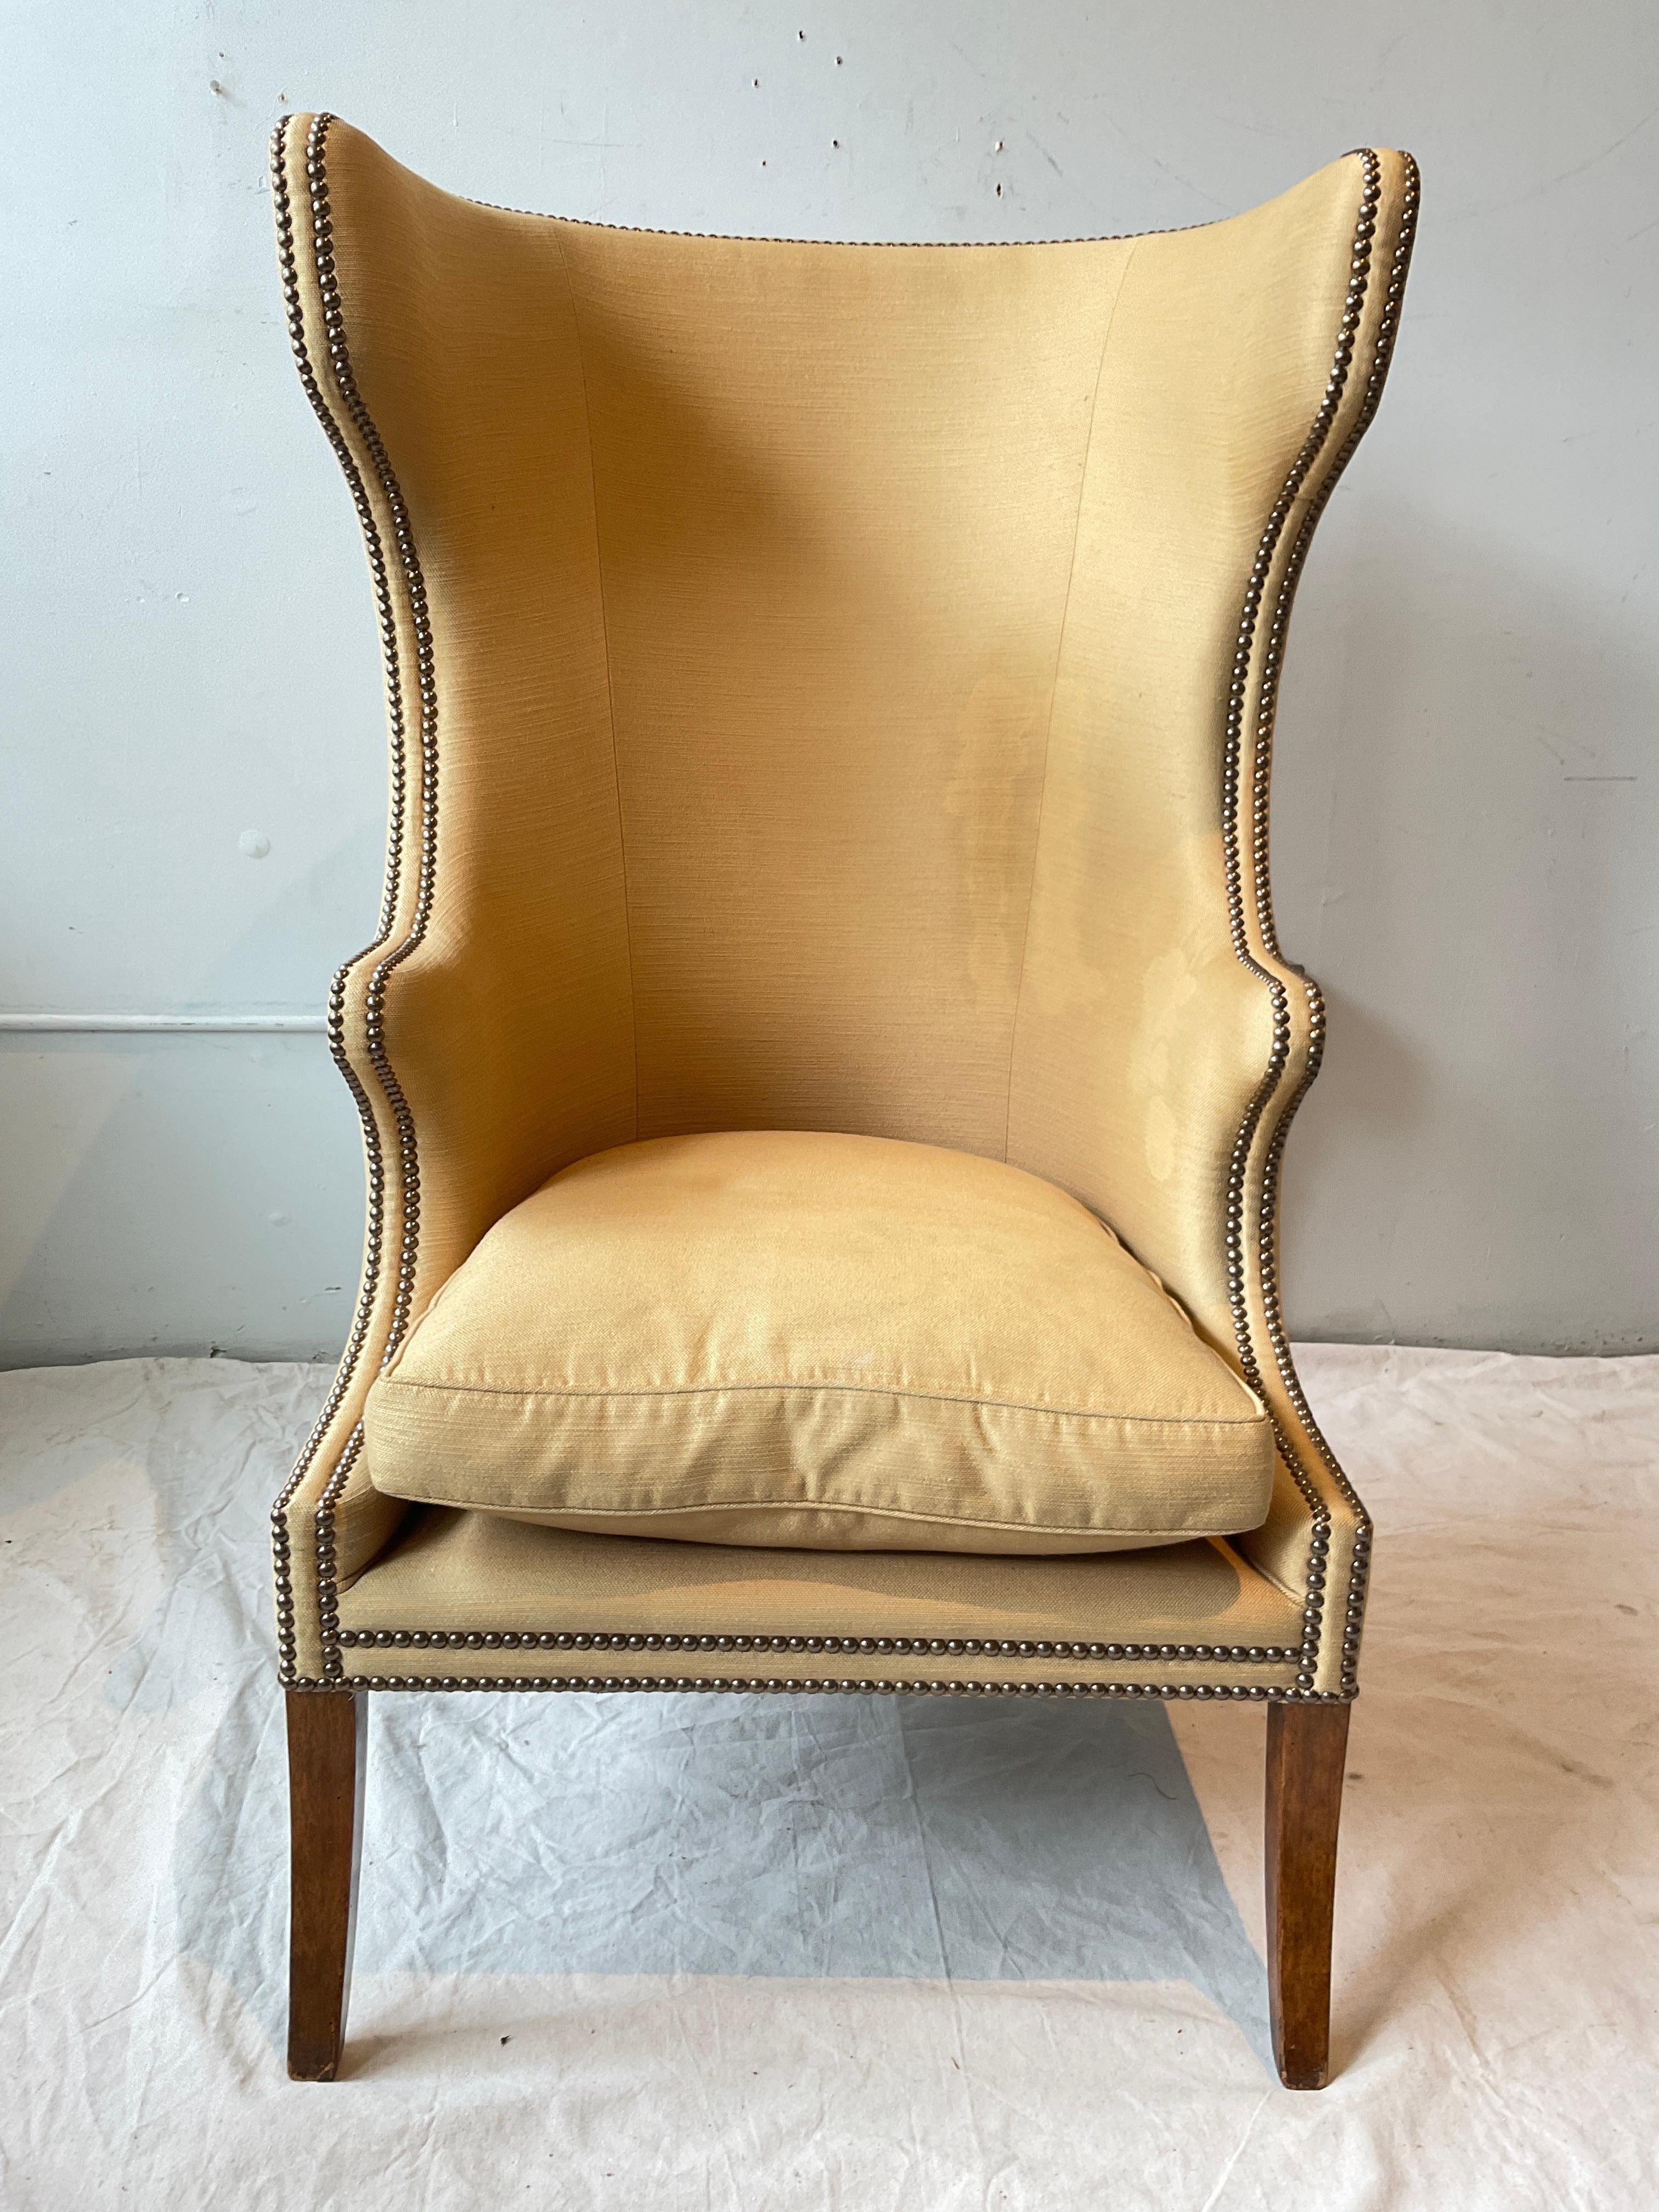 Dennis & Leen wingback chair. Stains on fabric, on back, and on front as seen in image 8. Needs reupholstring.